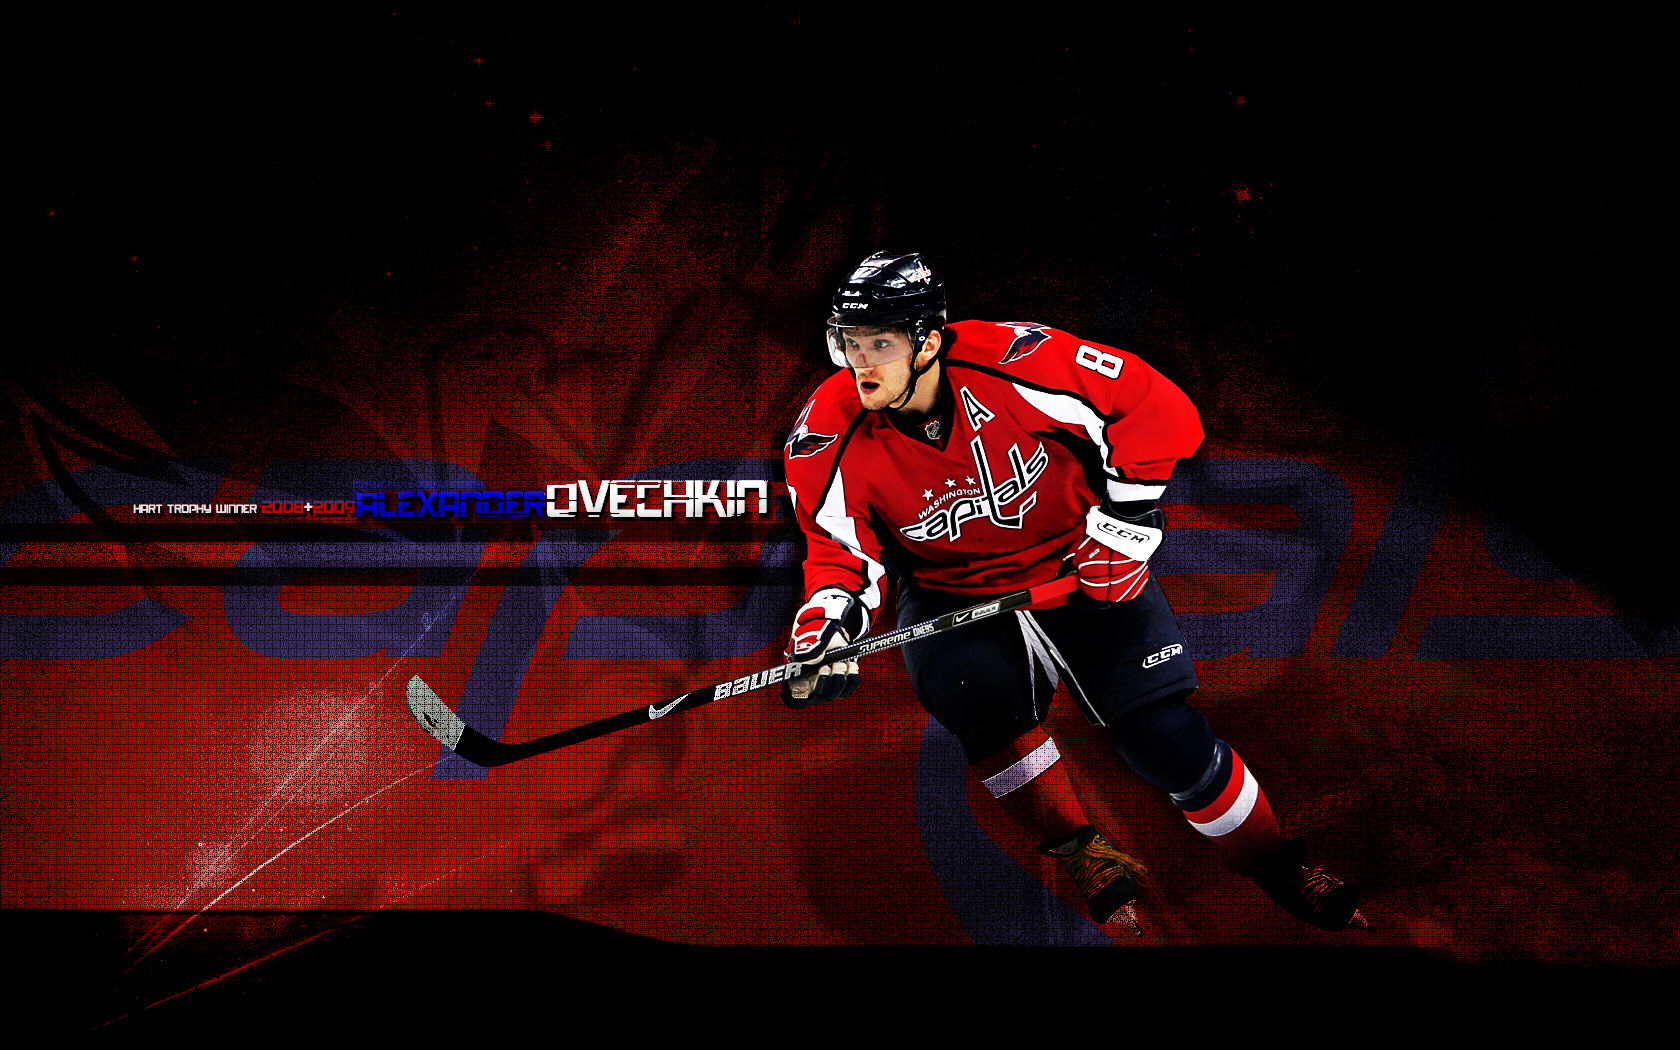 Washington Capitals wallpaper by ShuckCreations - Download on